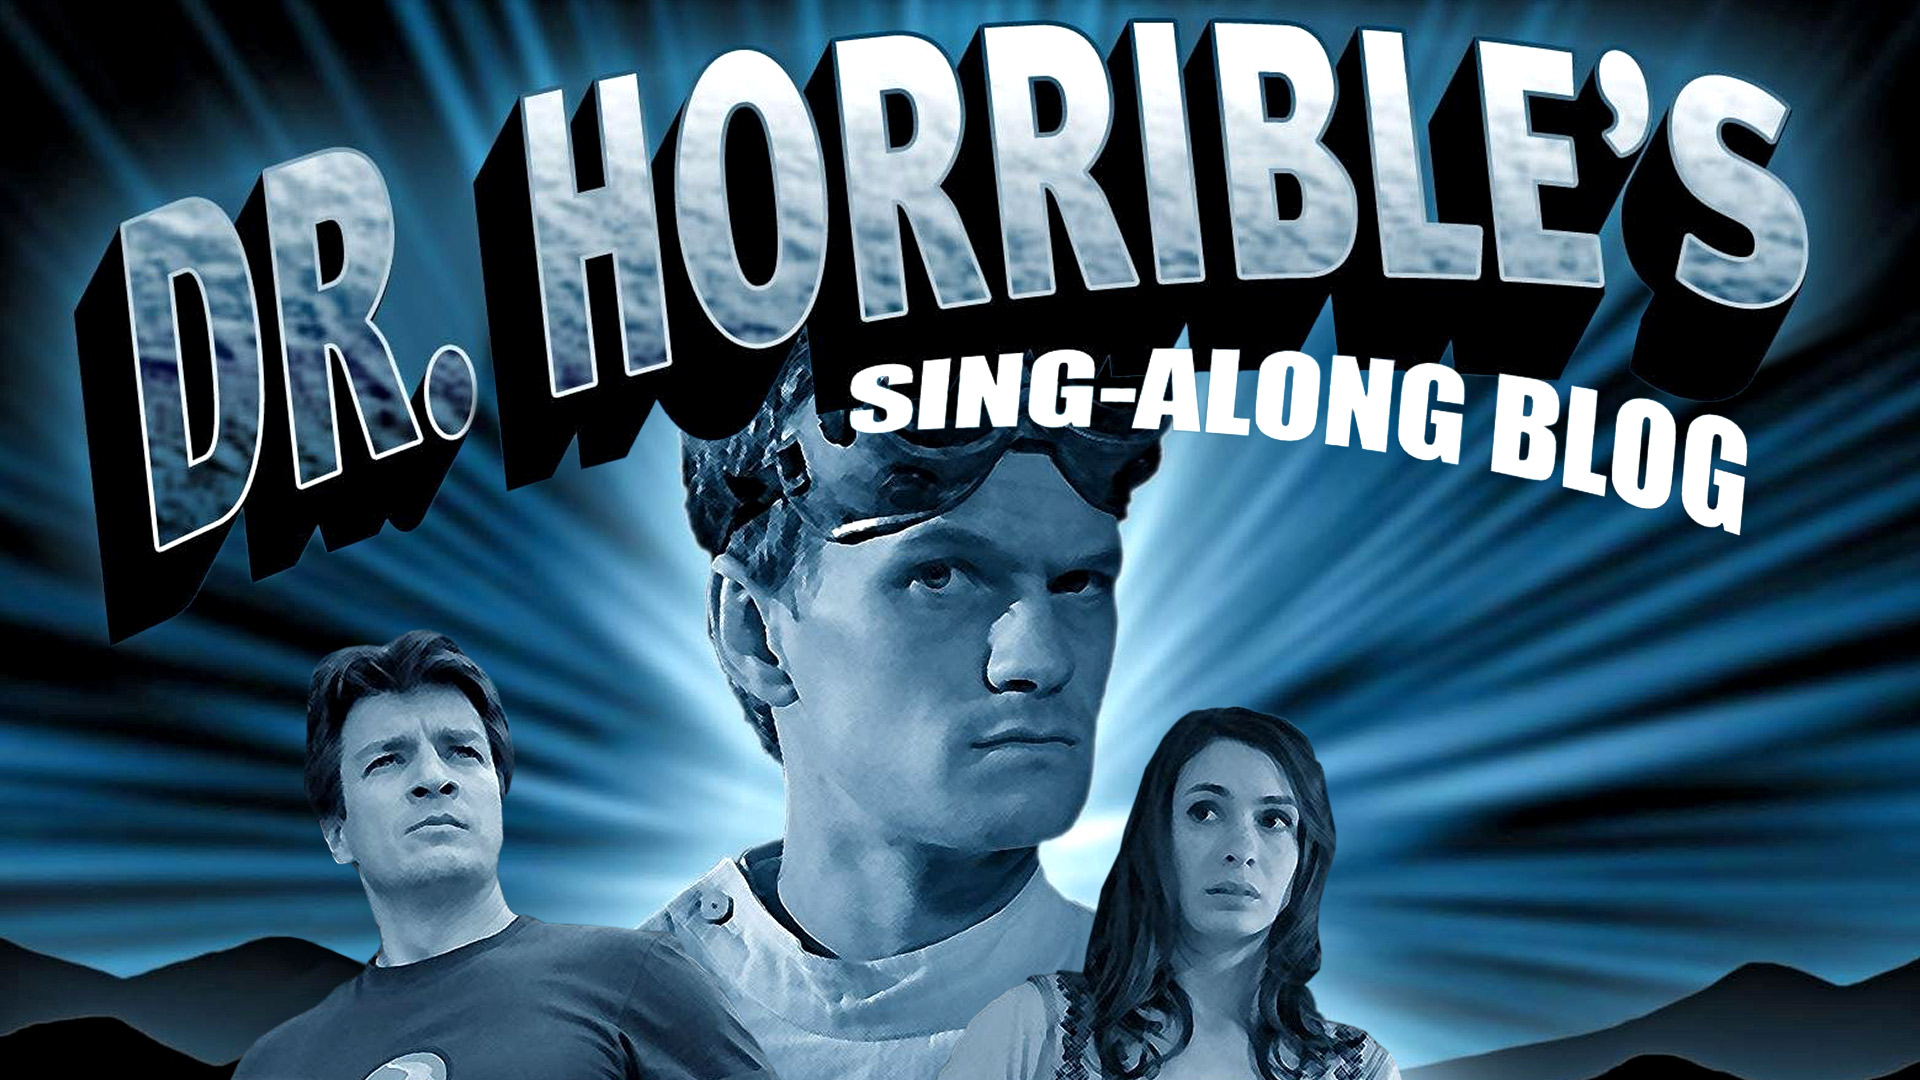 34-facts-about-the-movie-dr-horribles-sing-along-blog